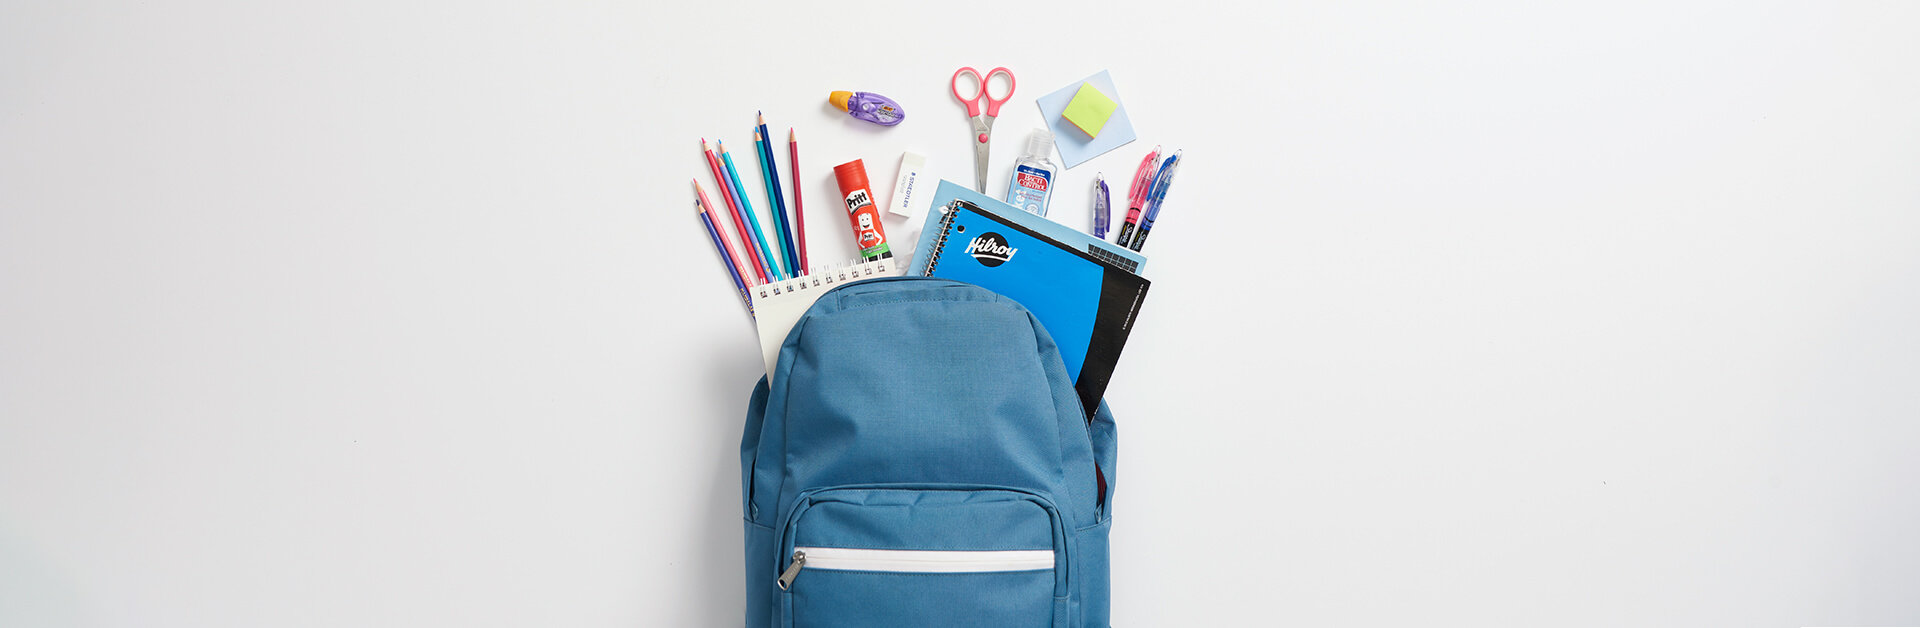 Blue back pack with and assortment of school supplies.